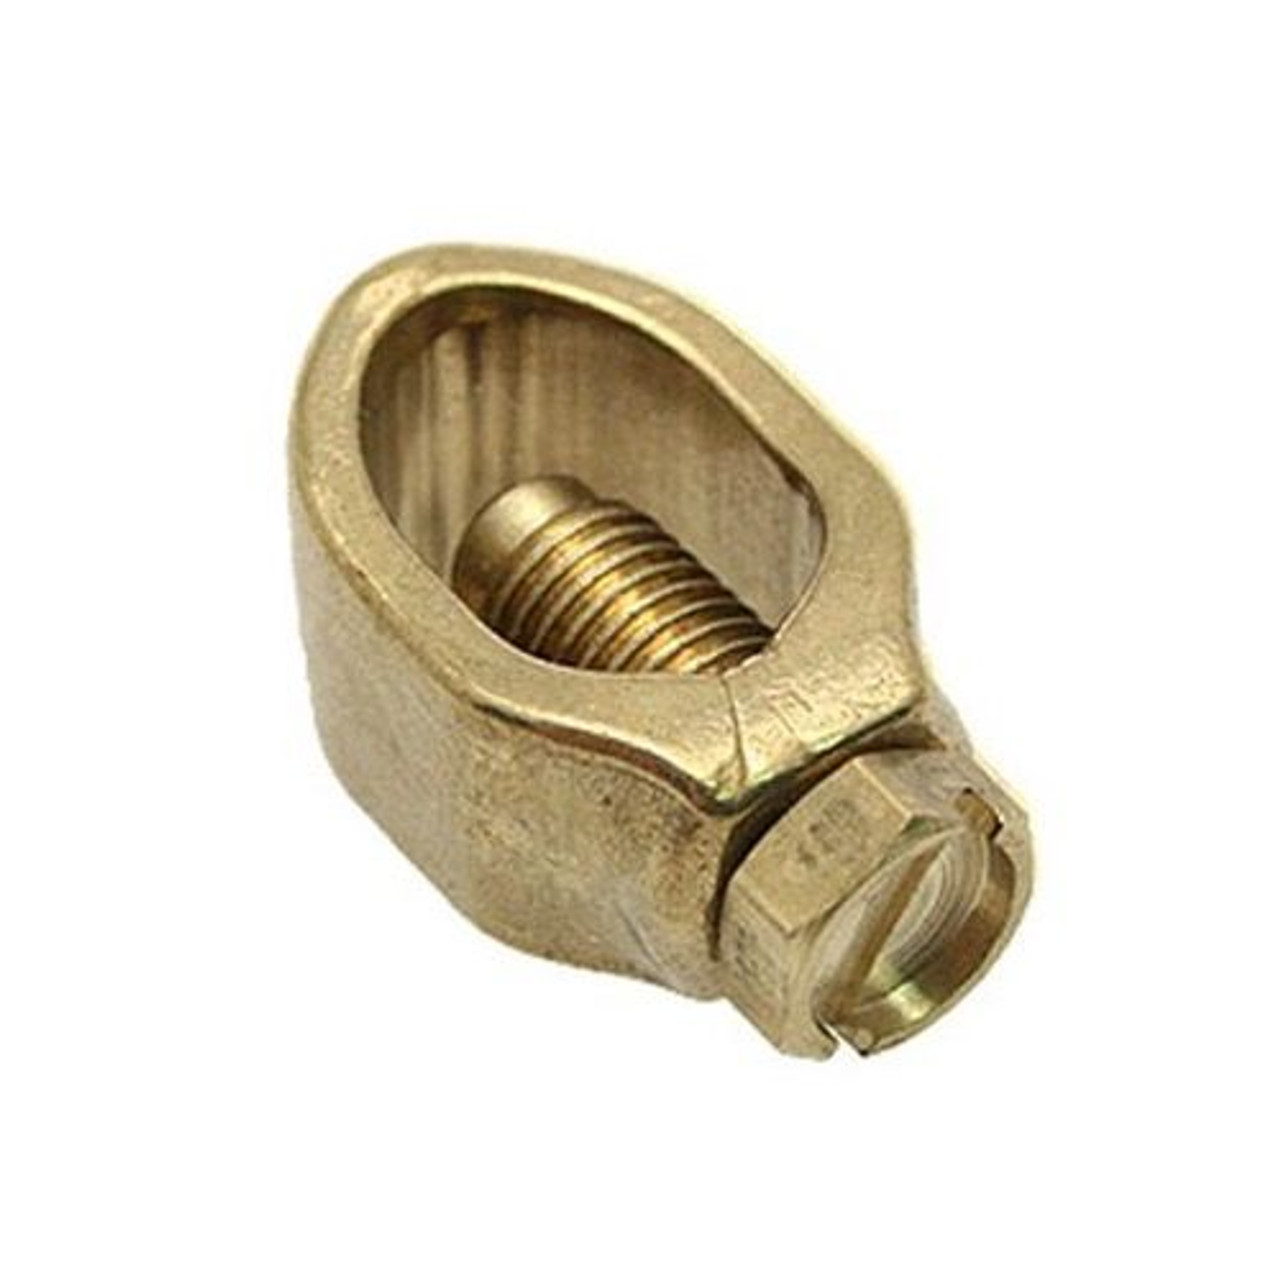 Steren 200-294 5/8" Acorn Ground Clamp BRASS Grounding Rod Clamp Outdoor Lightning Electrical Copper Grounding Wire Bonding for Satellite TV Aerial Antenna Protection